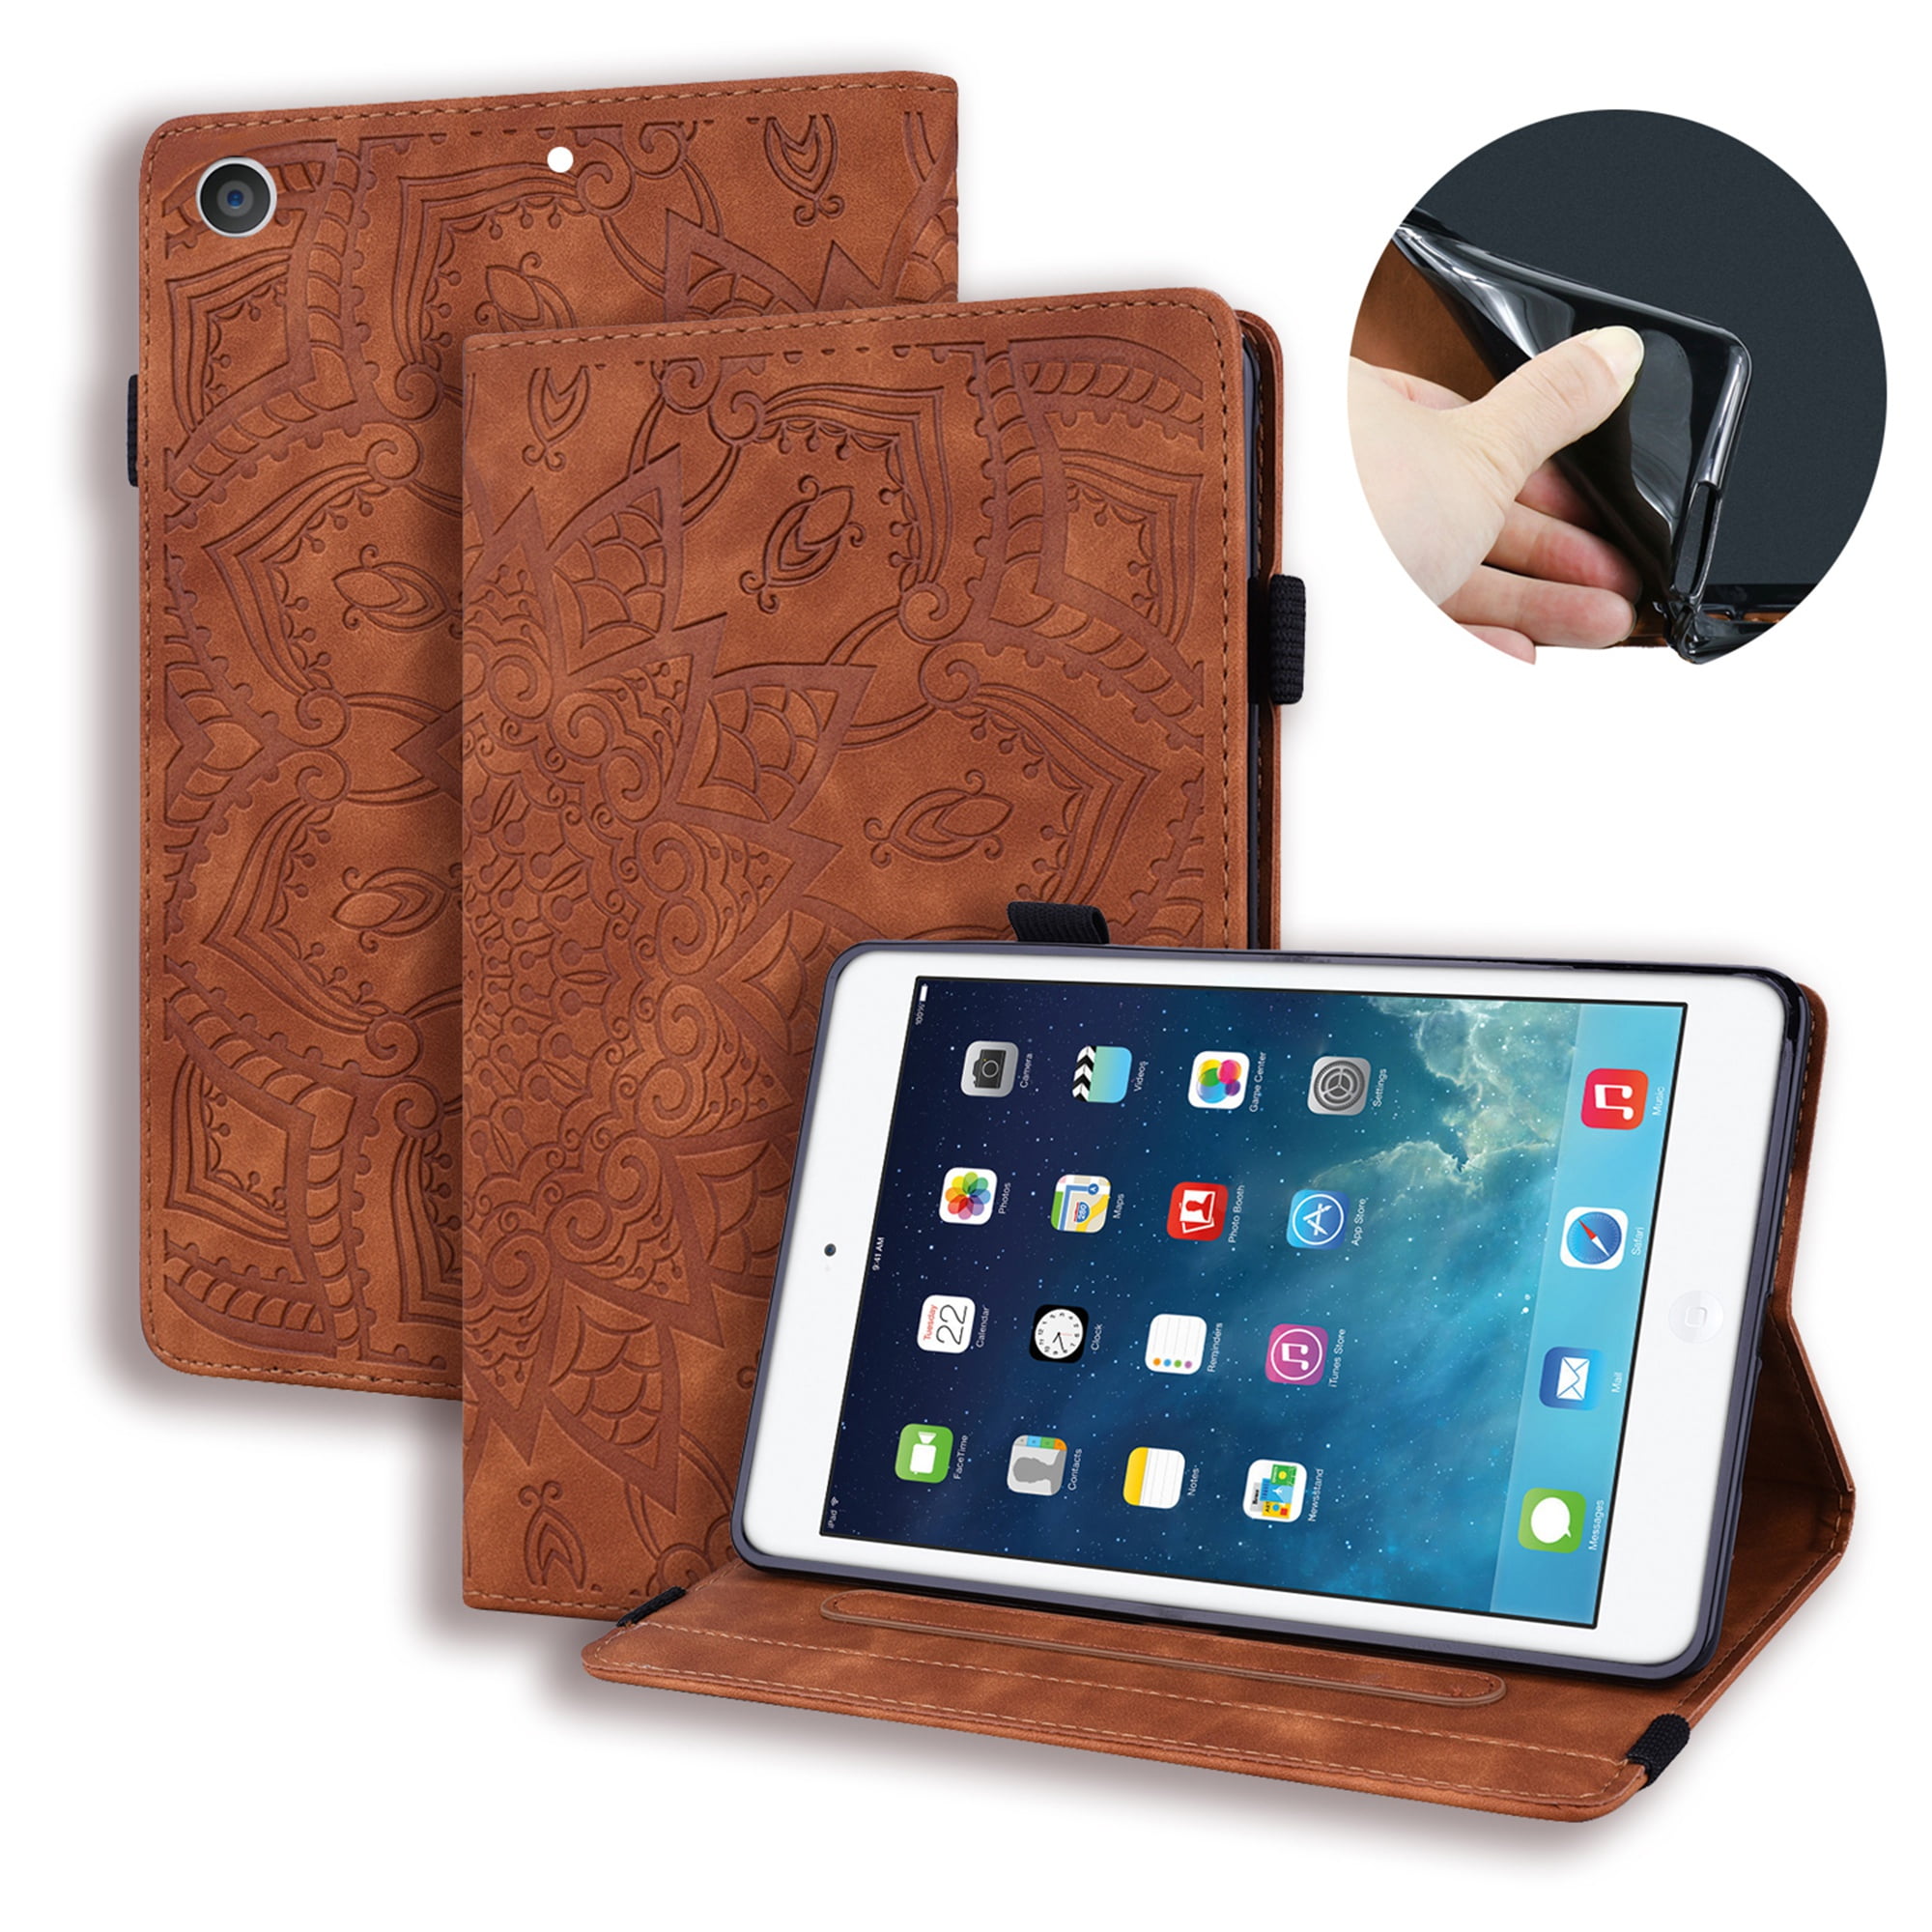 PU Leather Card Holder Flip Cover Folio Stand Case For iPad 9.7 6th 5th Gen 2018 